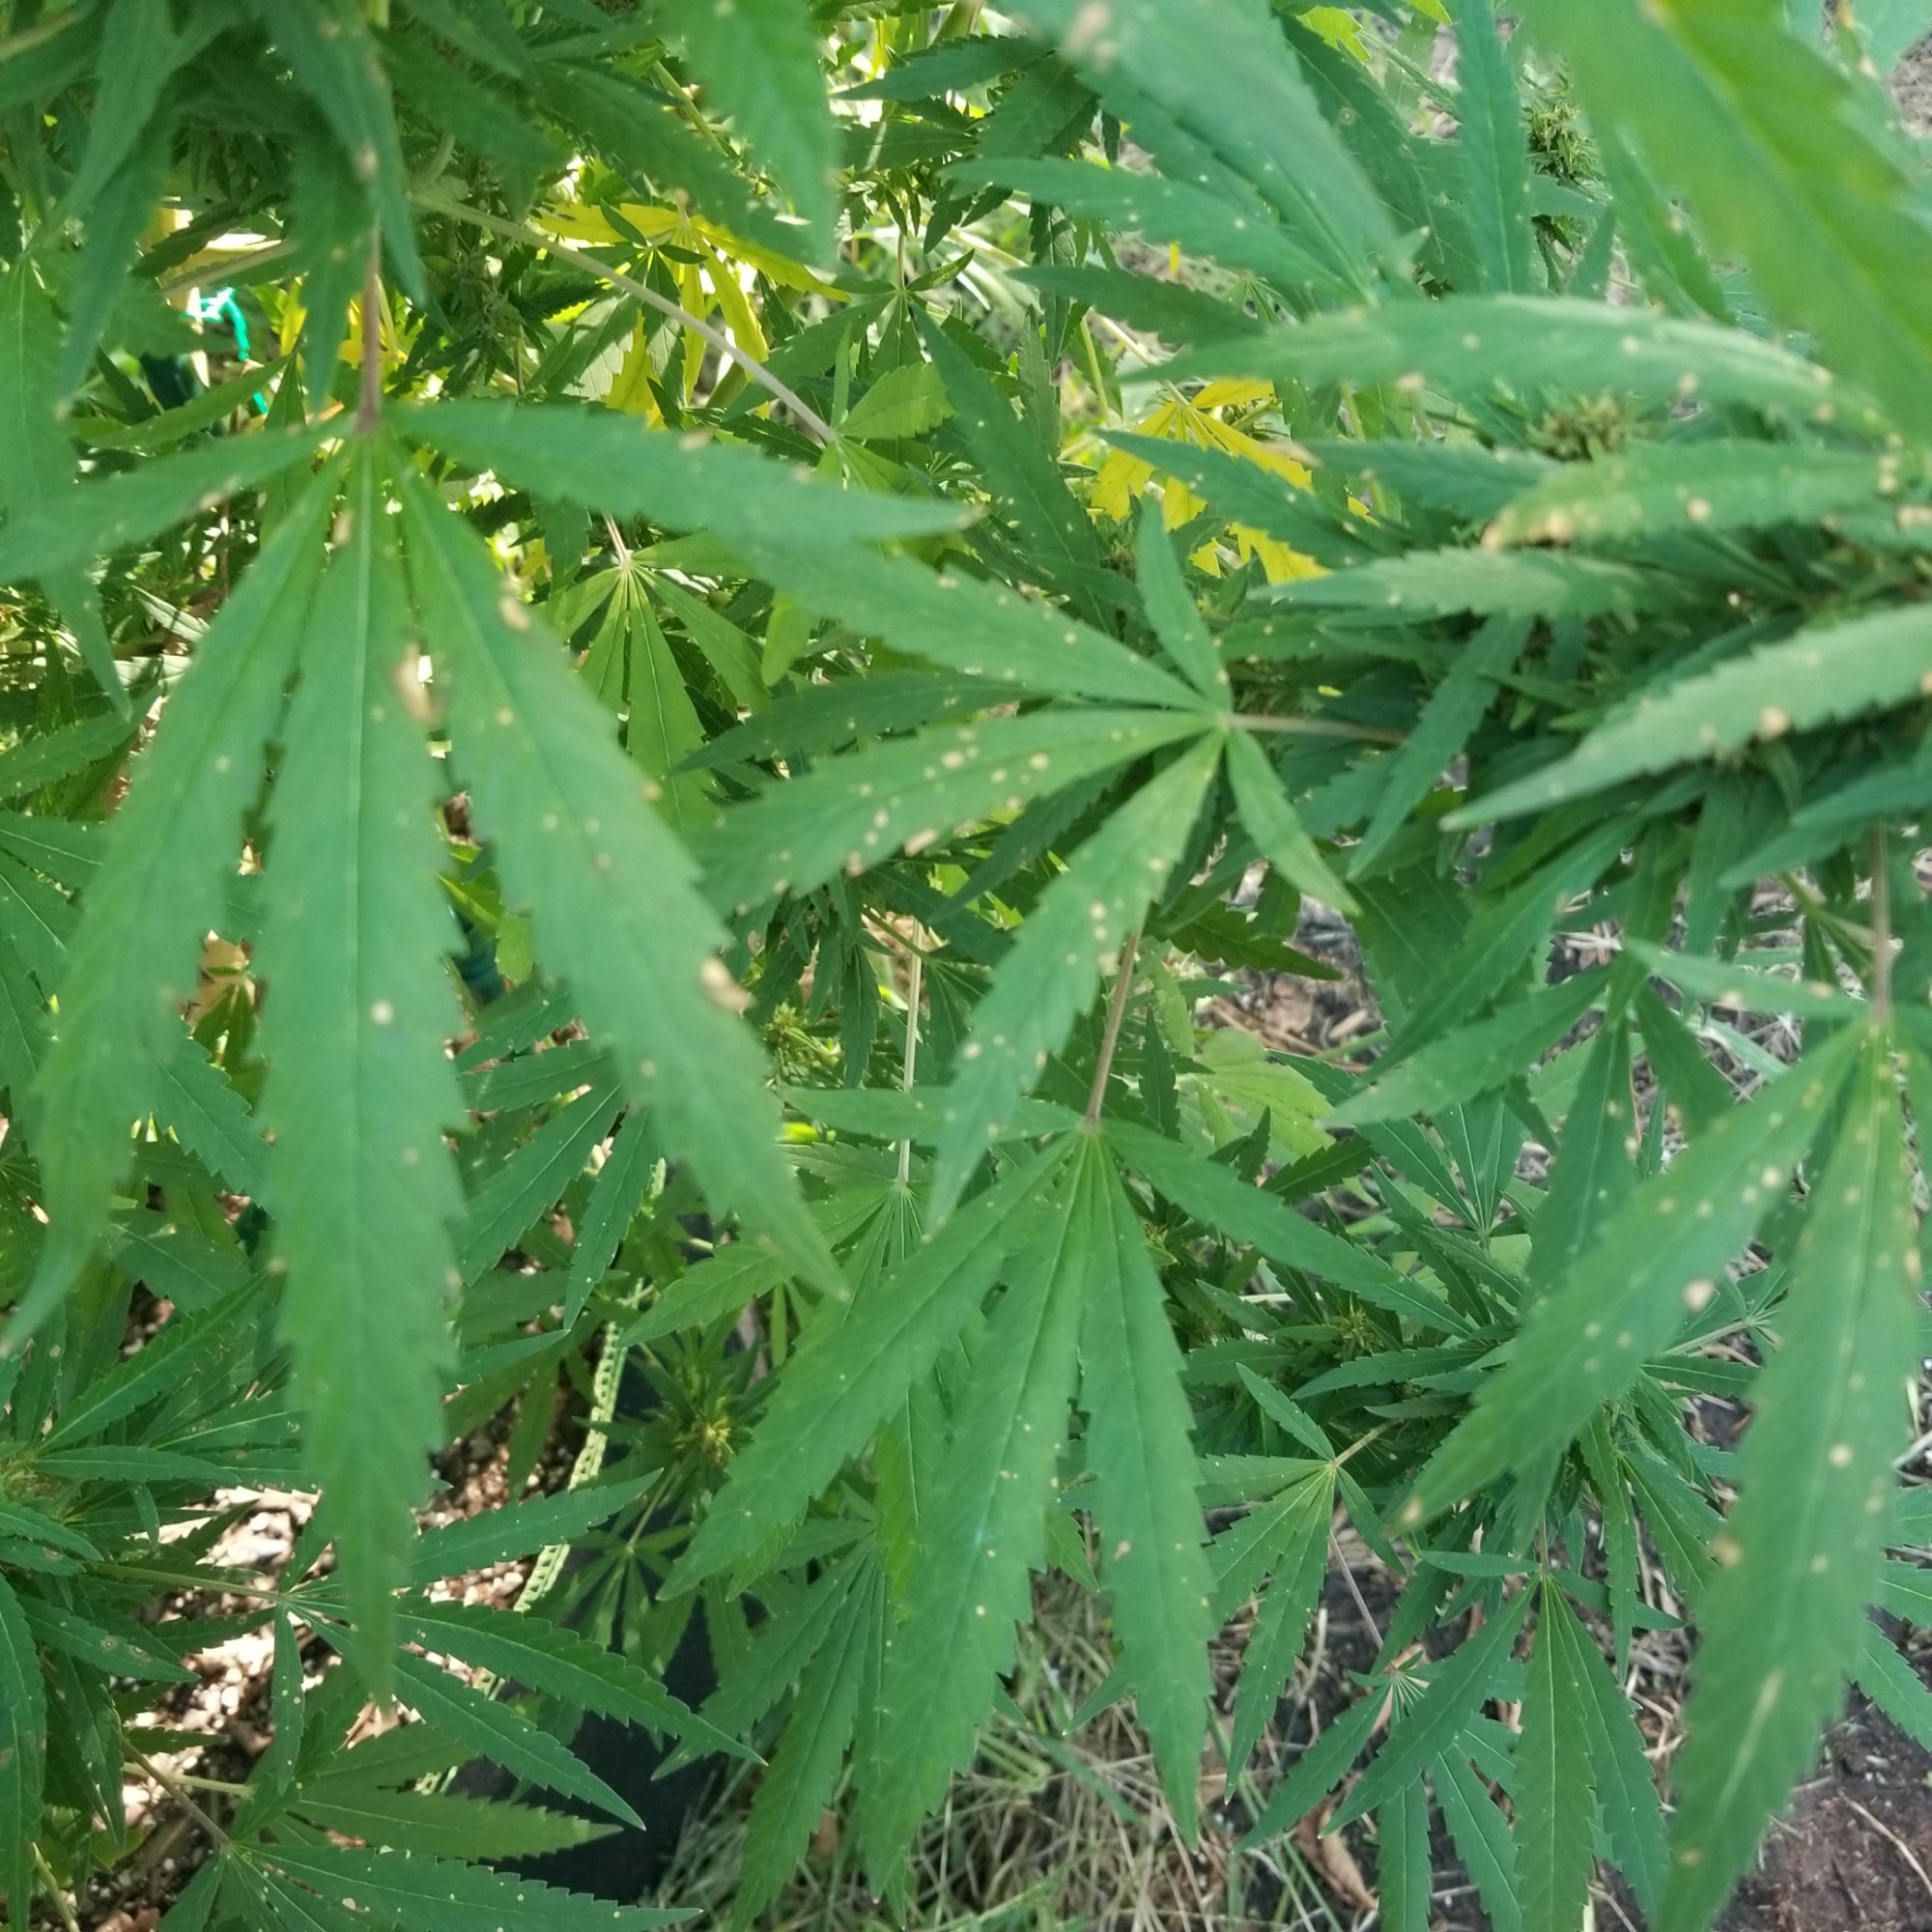 Whats going on with my plant 3